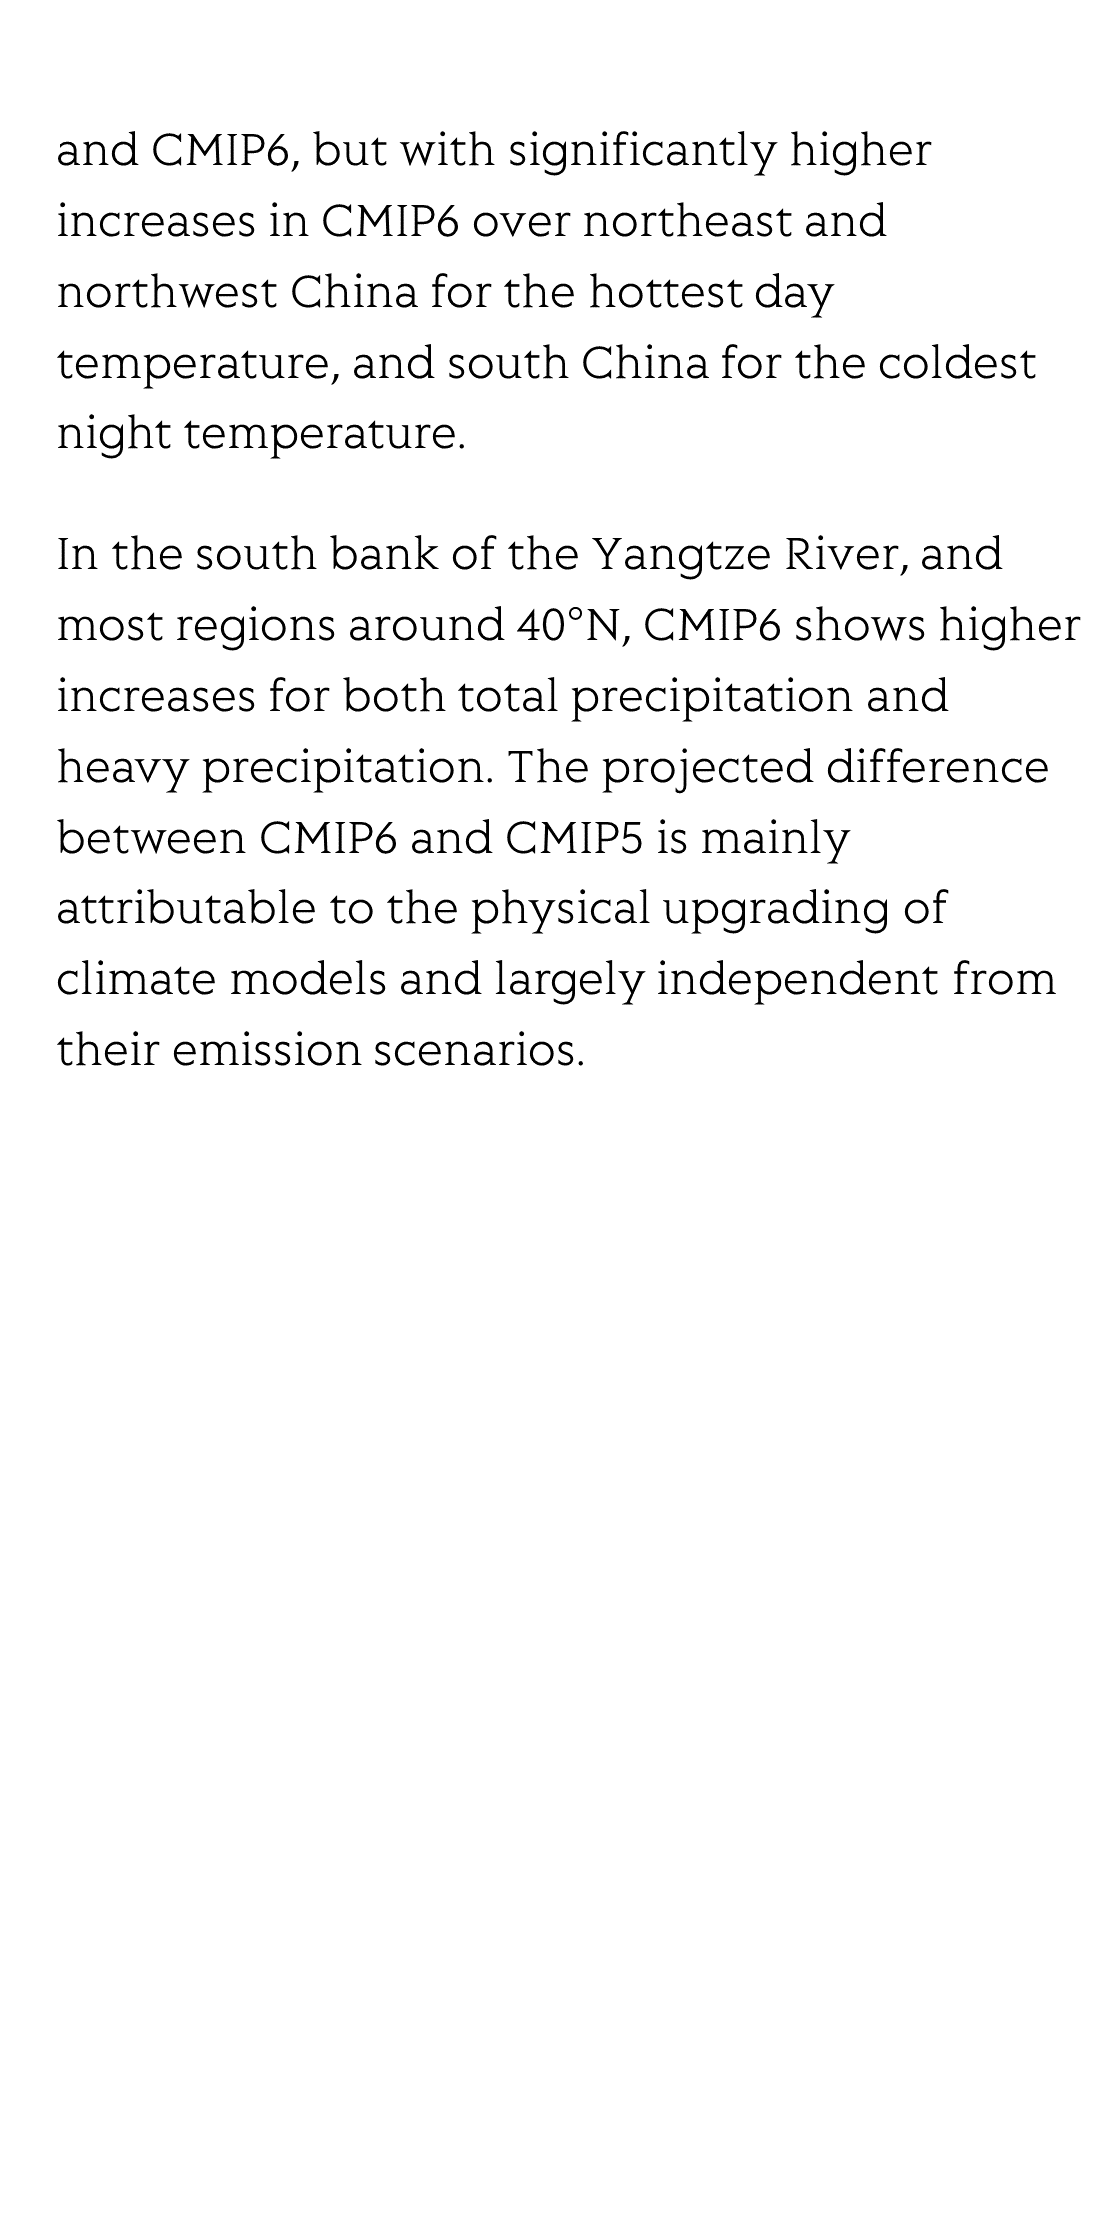 Projection of climate extremes in China, an incremental exercise from CMIP5 to CMIP6_3